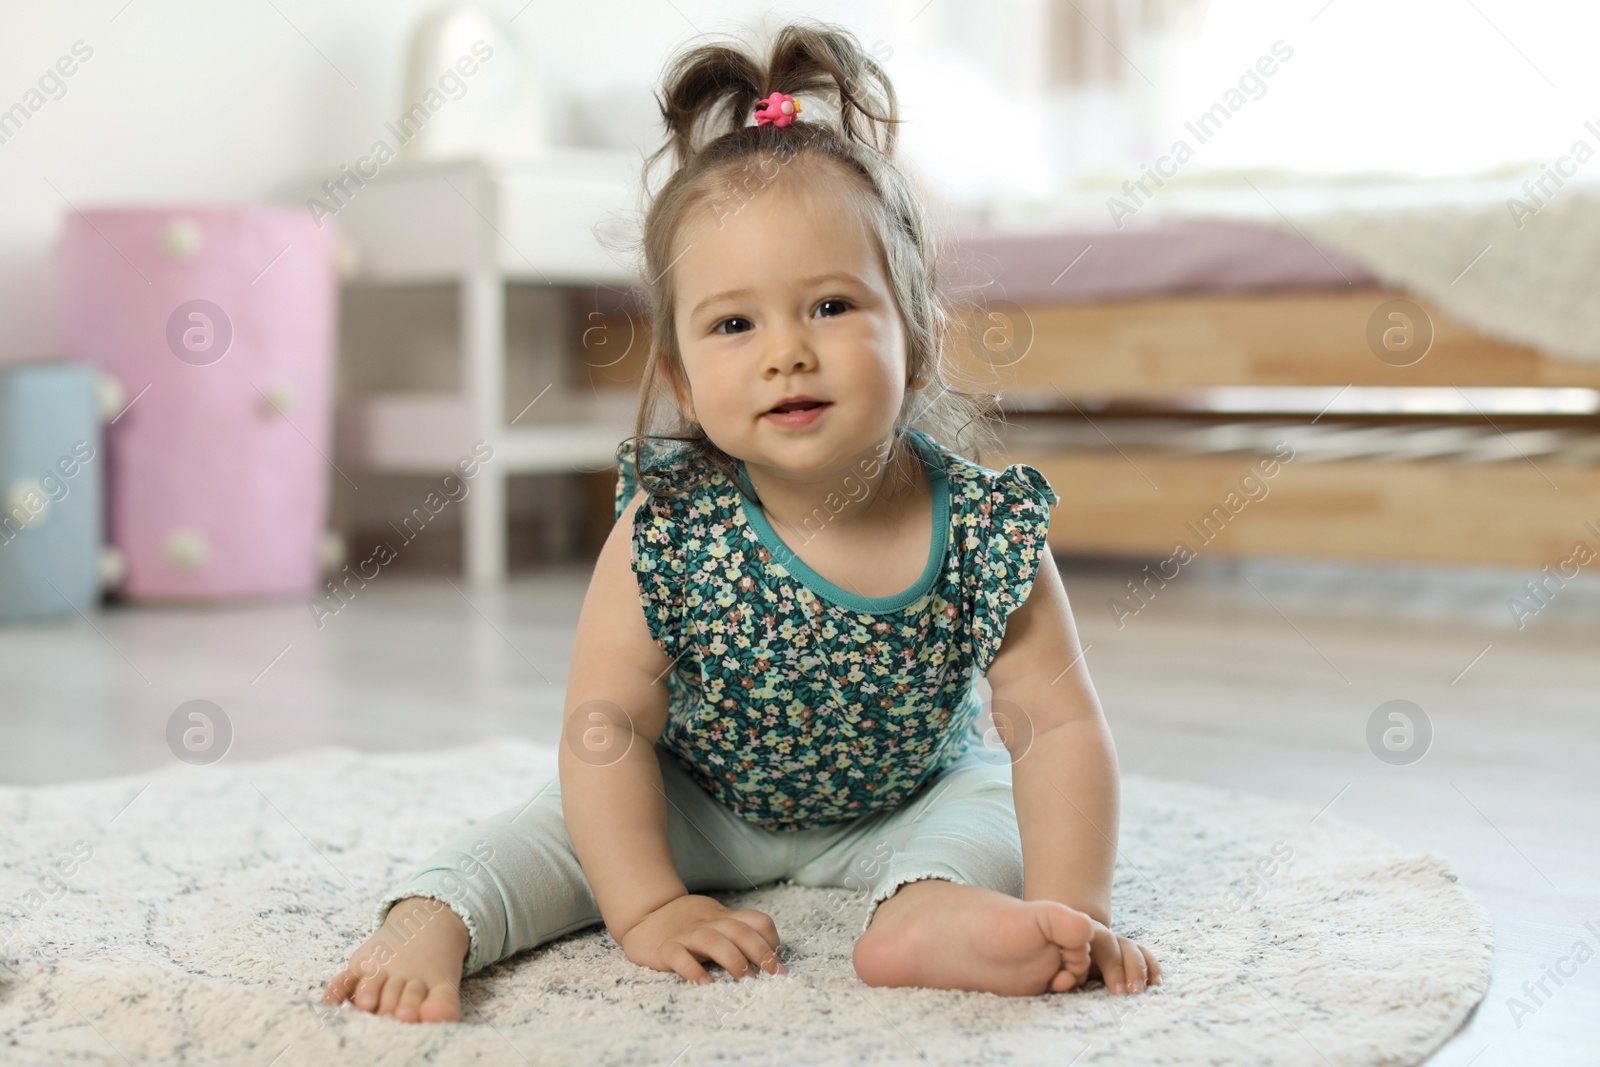 Photo of Adorable little baby girl sitting on floor in room